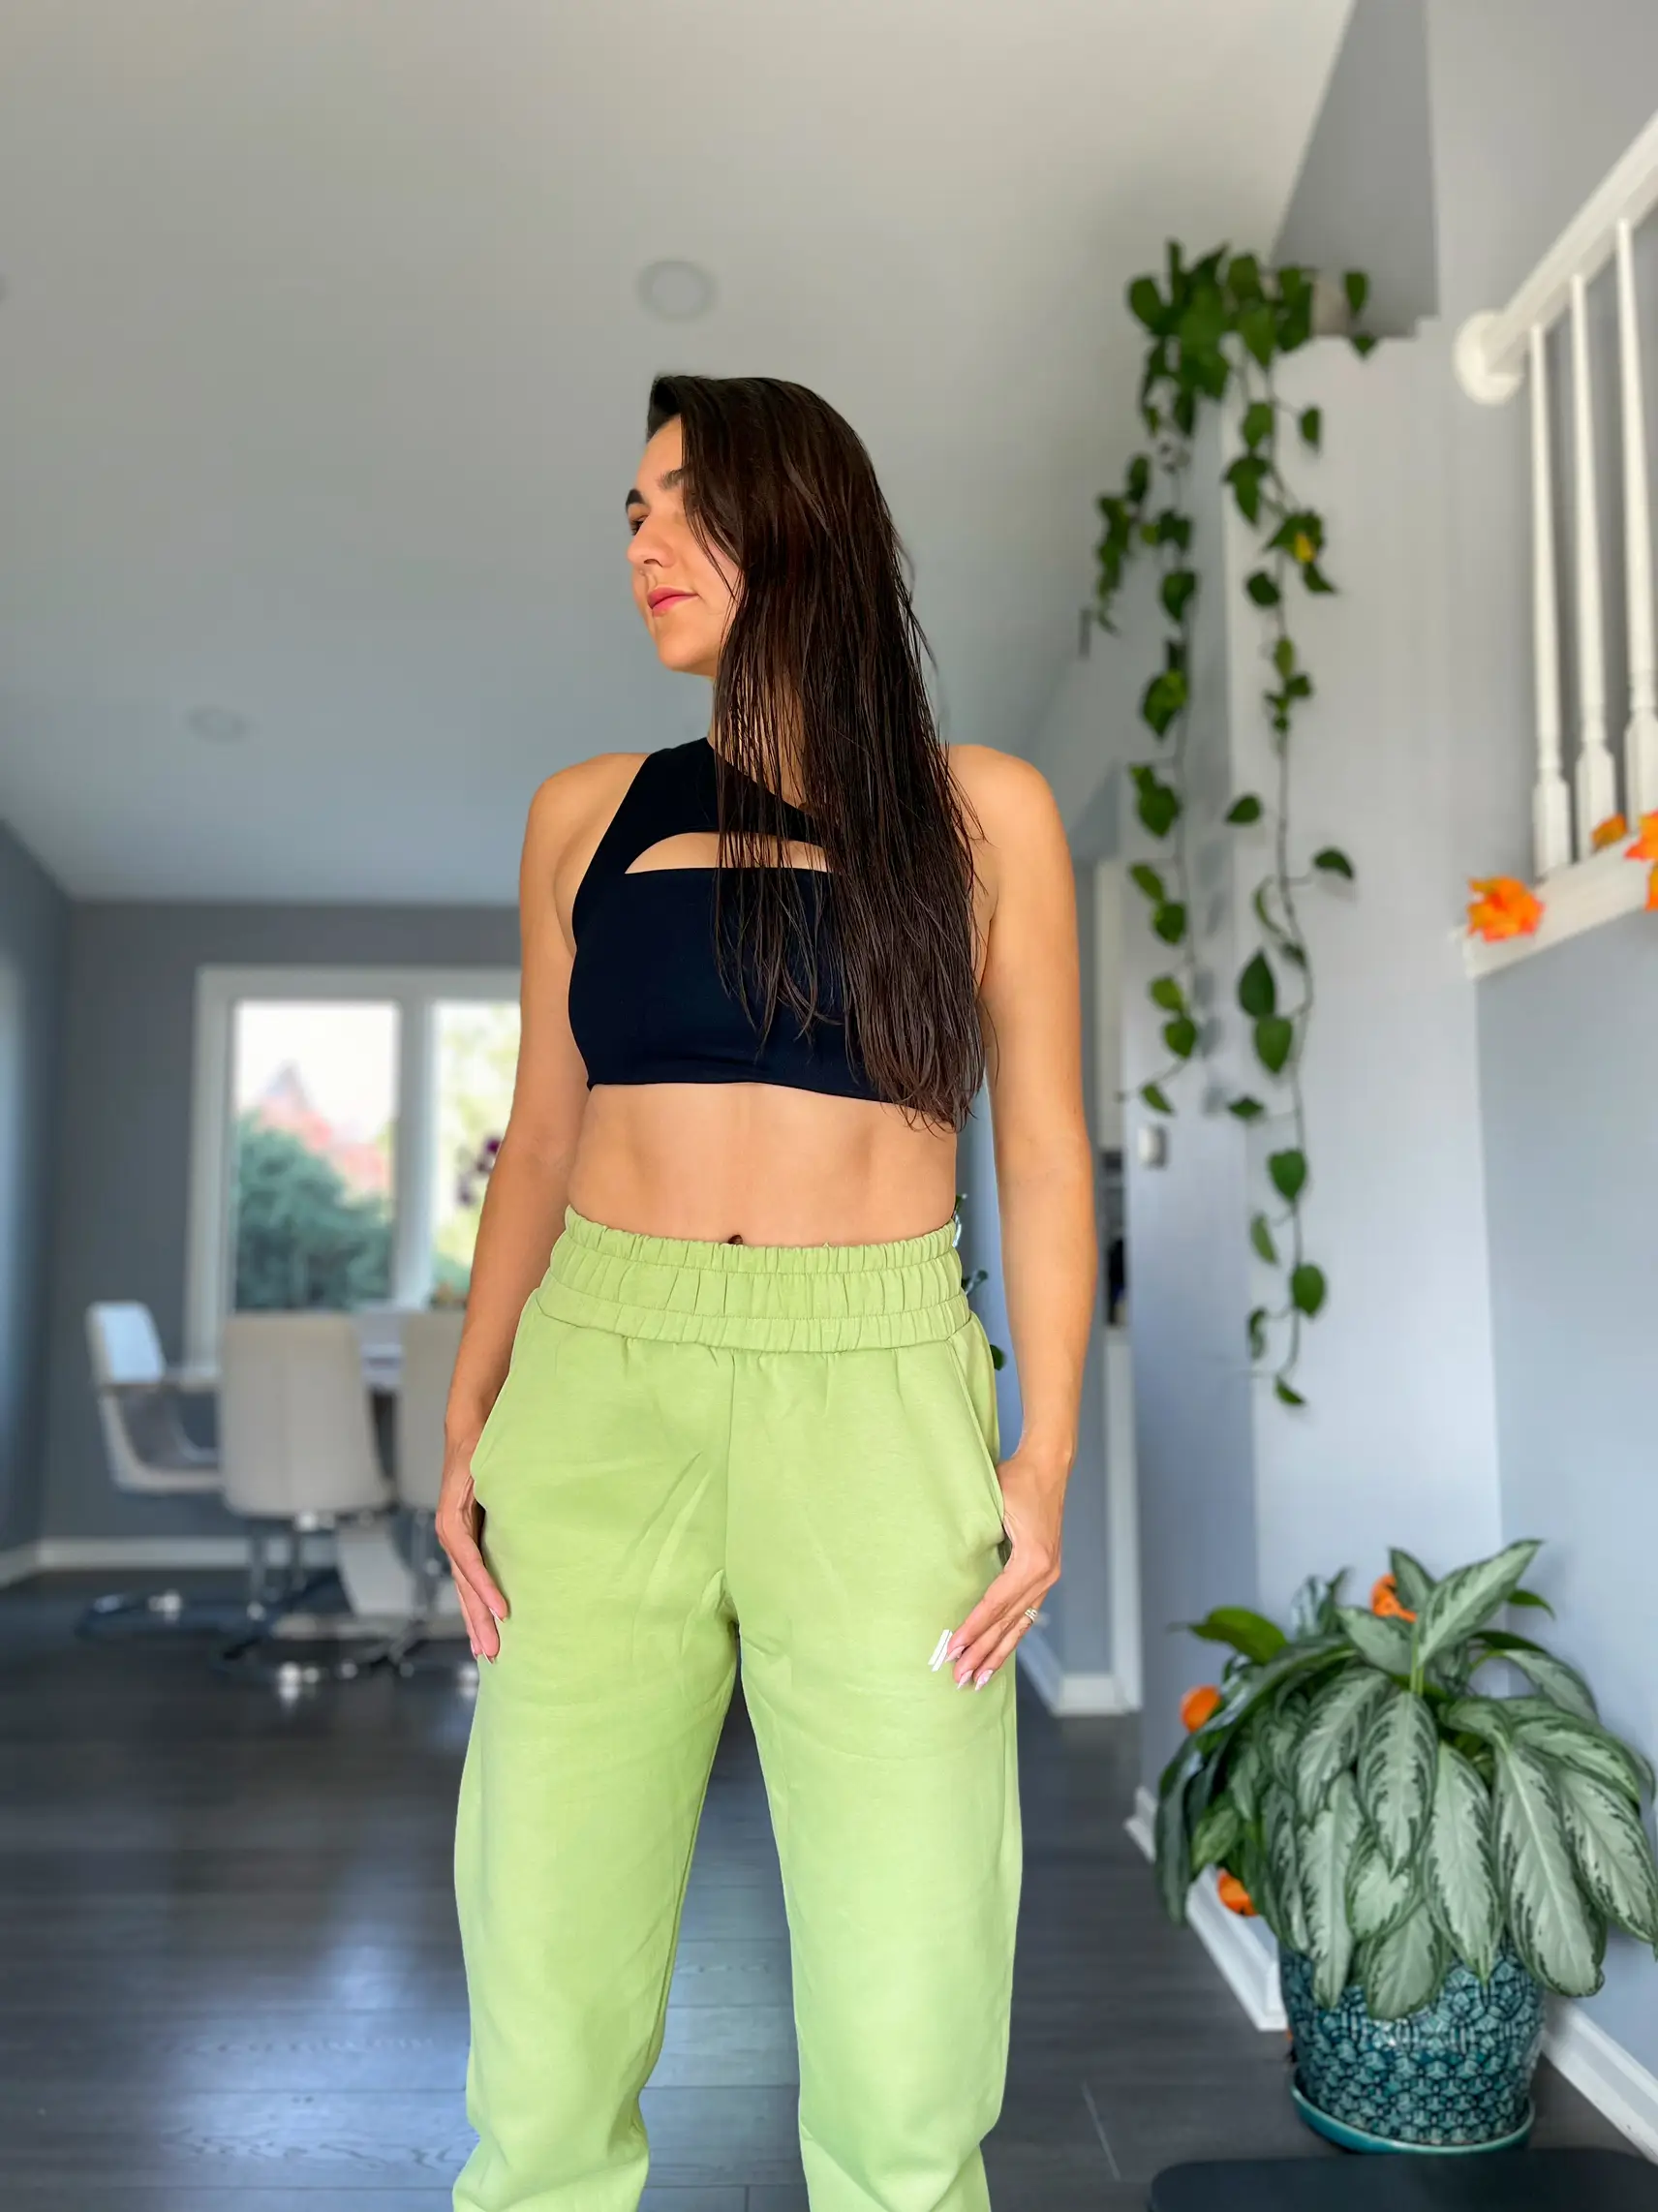 Double Crazy Neon Green Cargo Pants  Neon outfits, Green cargo pants,  Clothes for women